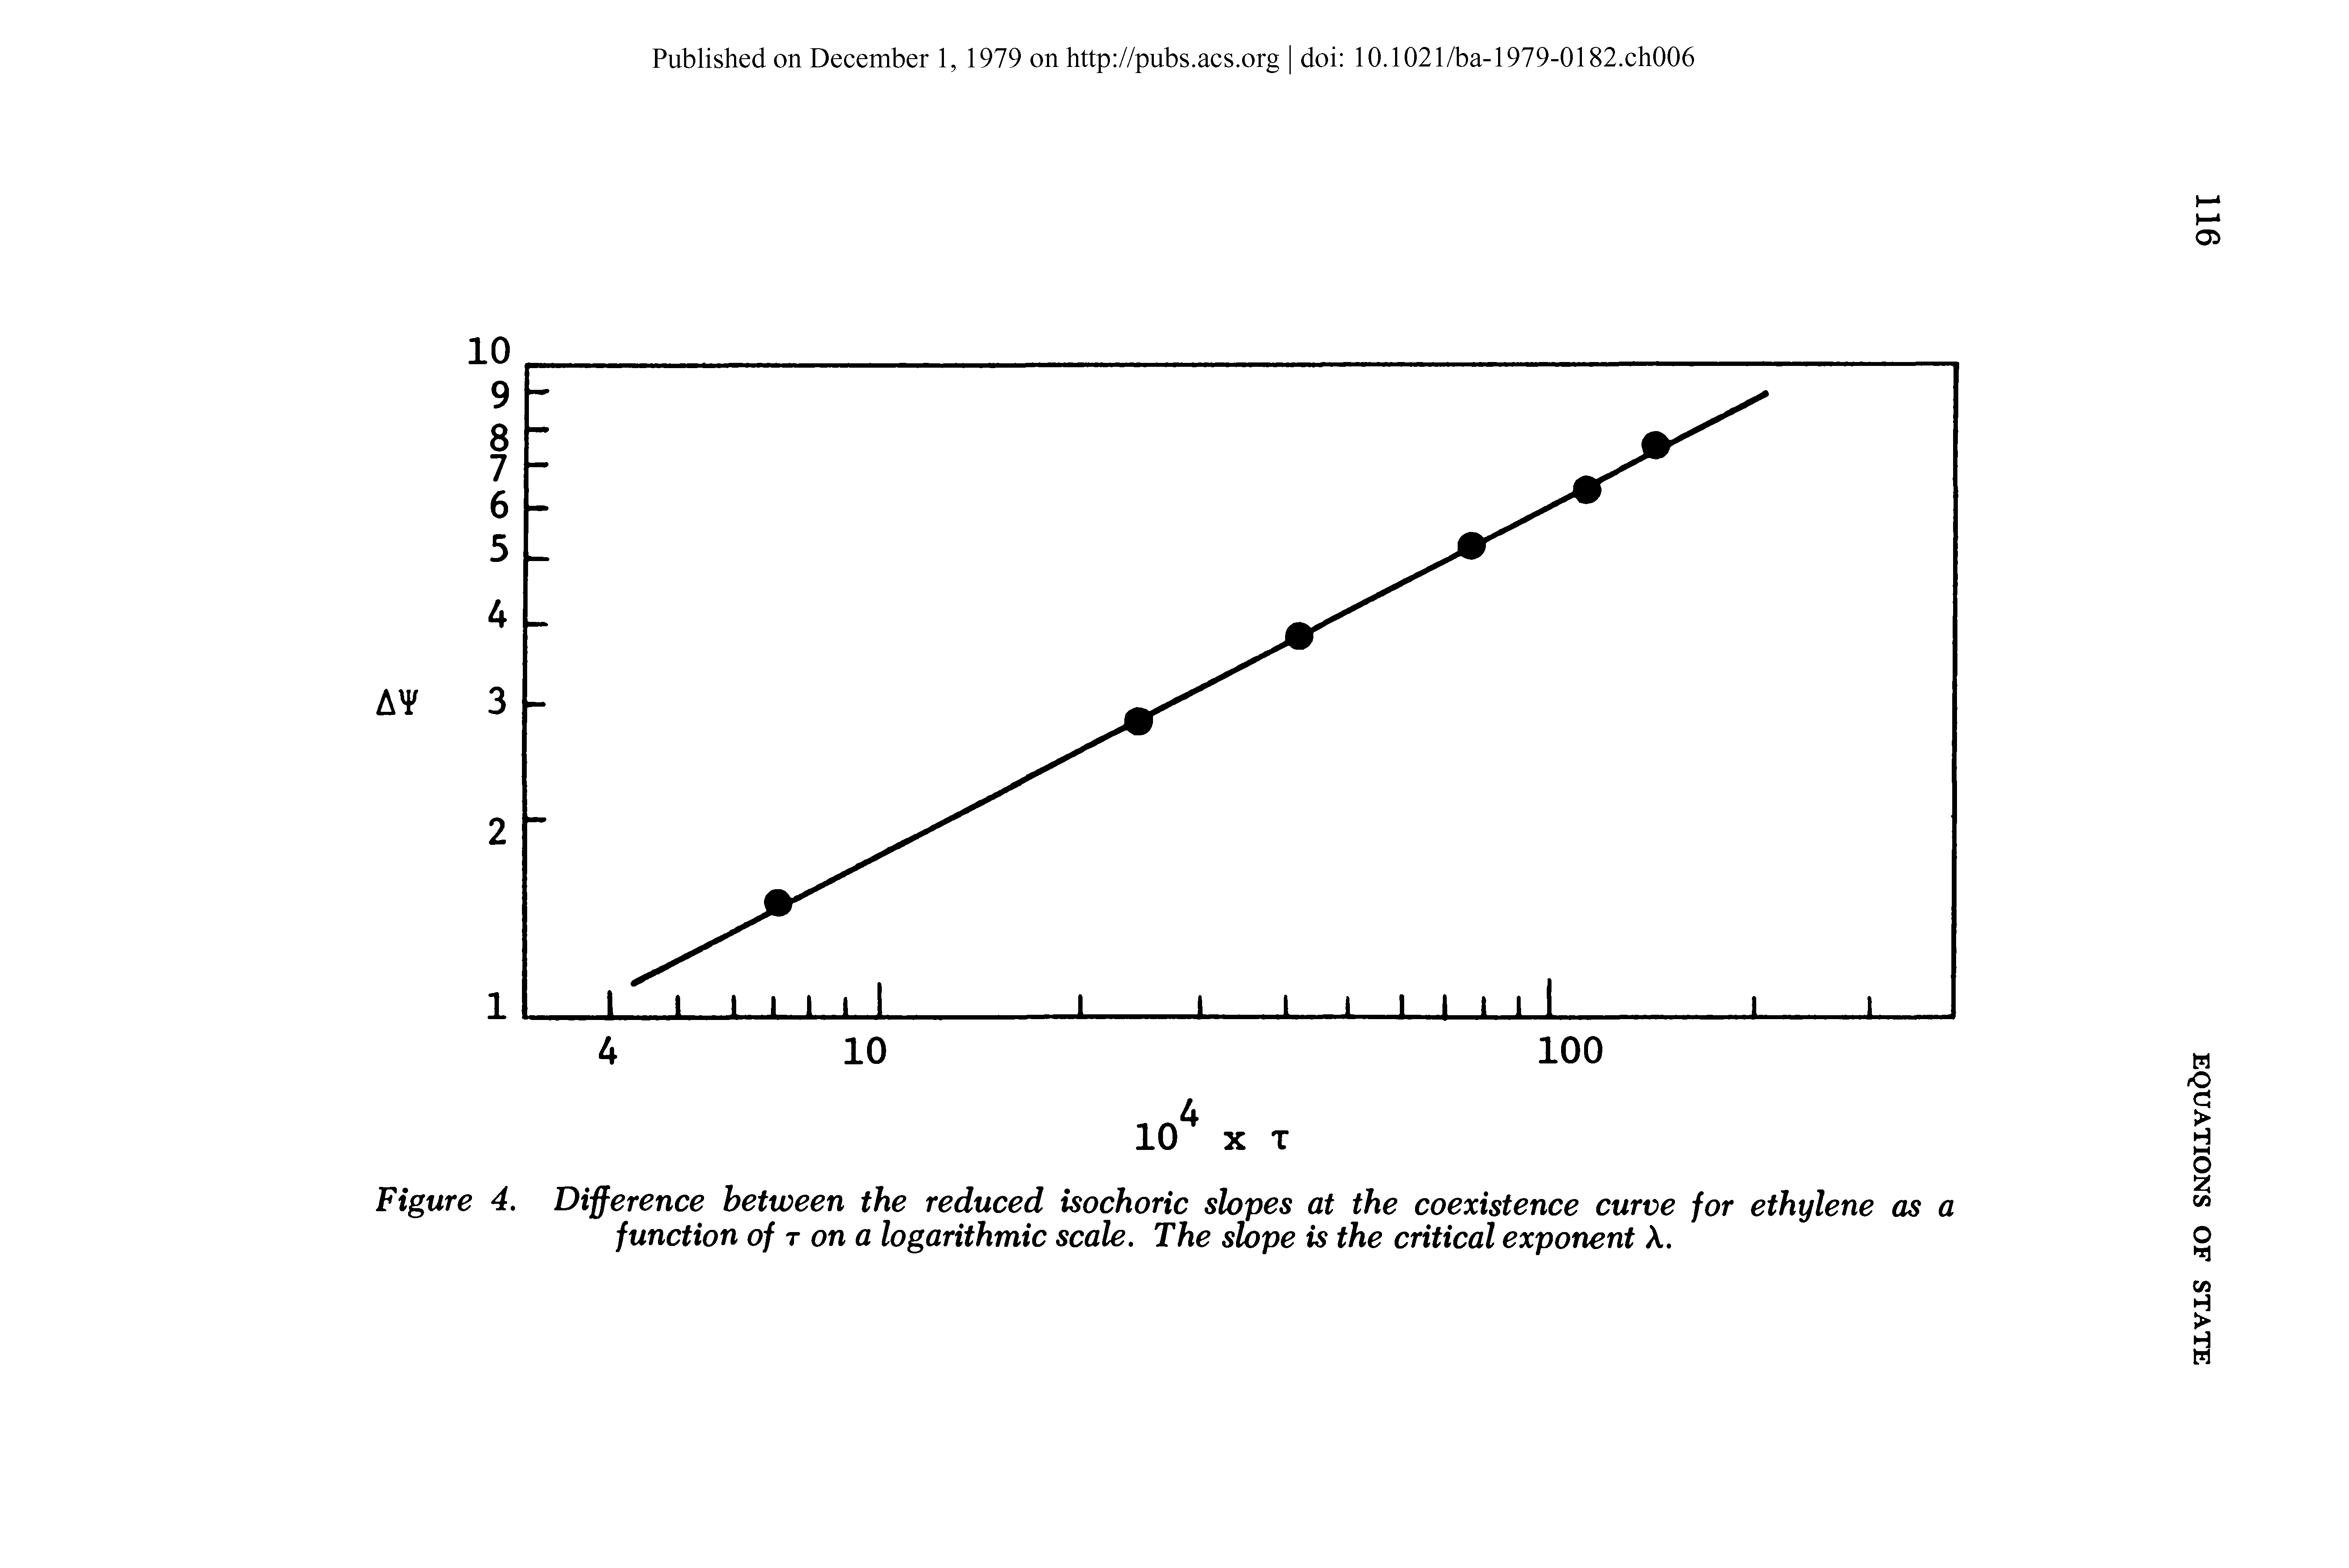 Figure 4. Difference between the reduced isochoric slopes at the coexistence curve for ethylene as a function of t on a logarithmic scale. The slope is the critical exponent A.